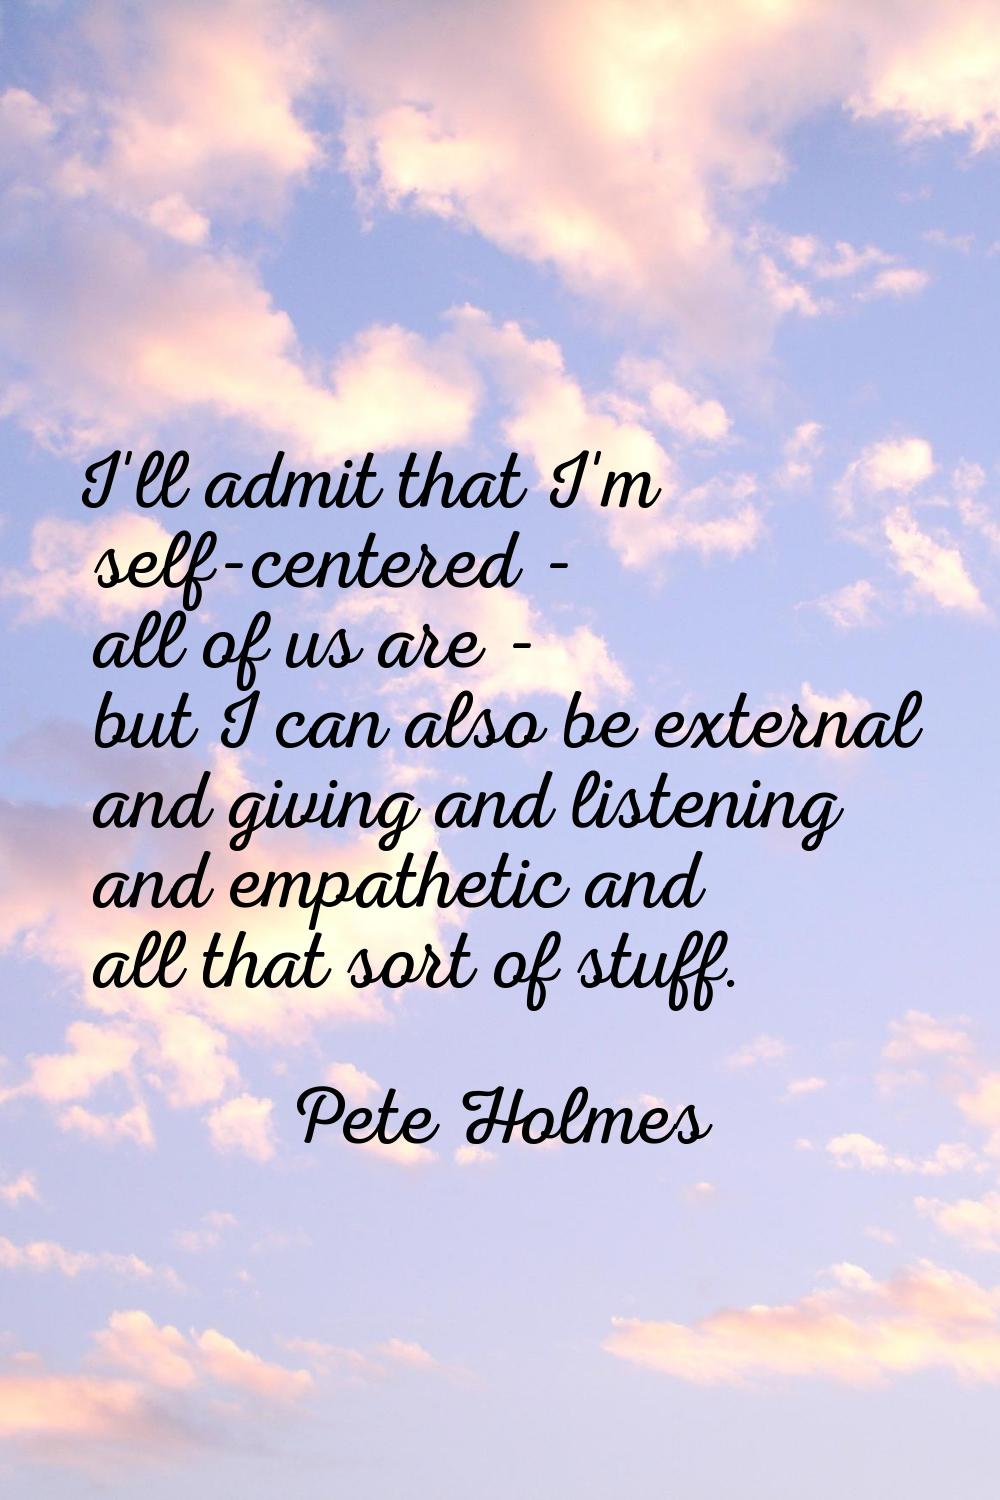 I'll admit that I'm self-centered - all of us are - but I can also be external and giving and liste